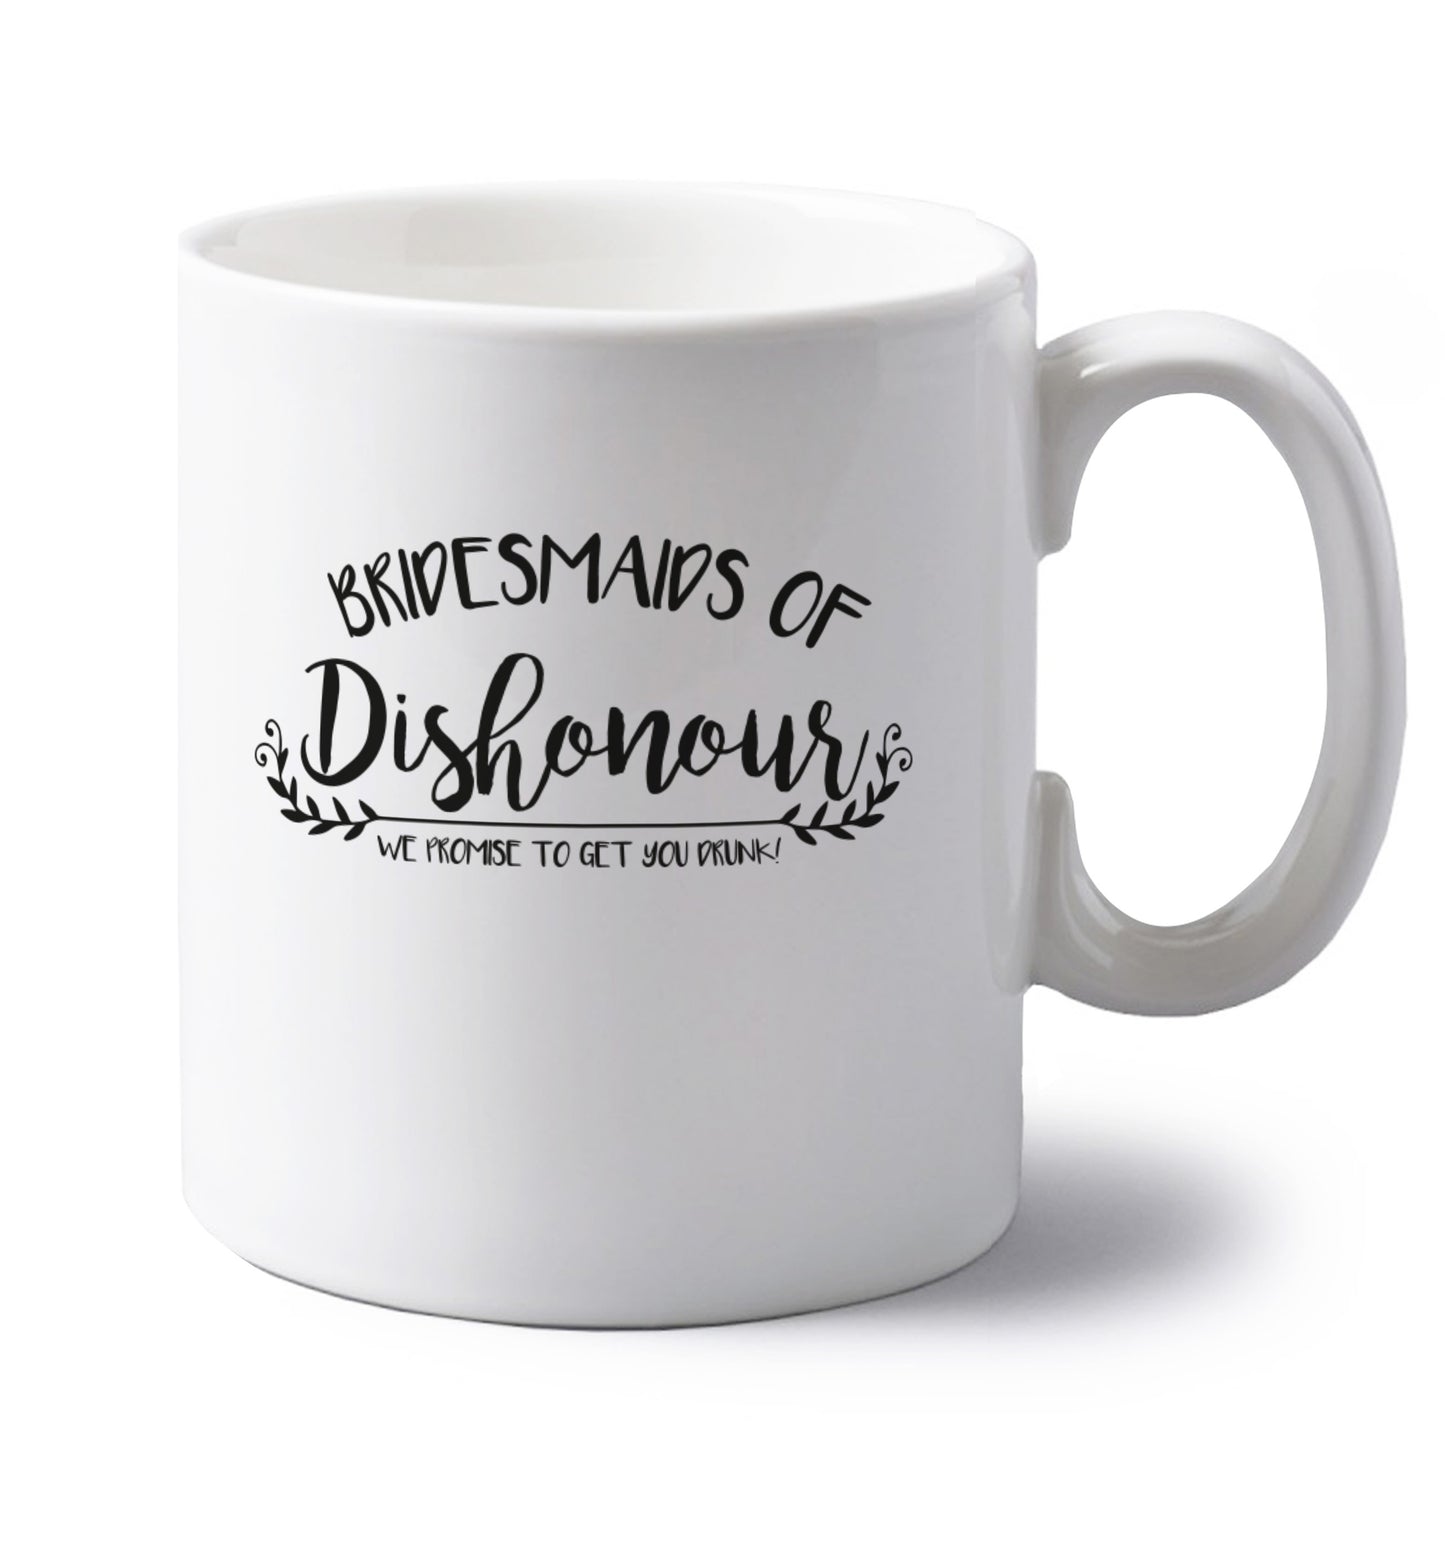 Bridesmaids of Dishonour we promise to get you drunk! left handed white ceramic mug 